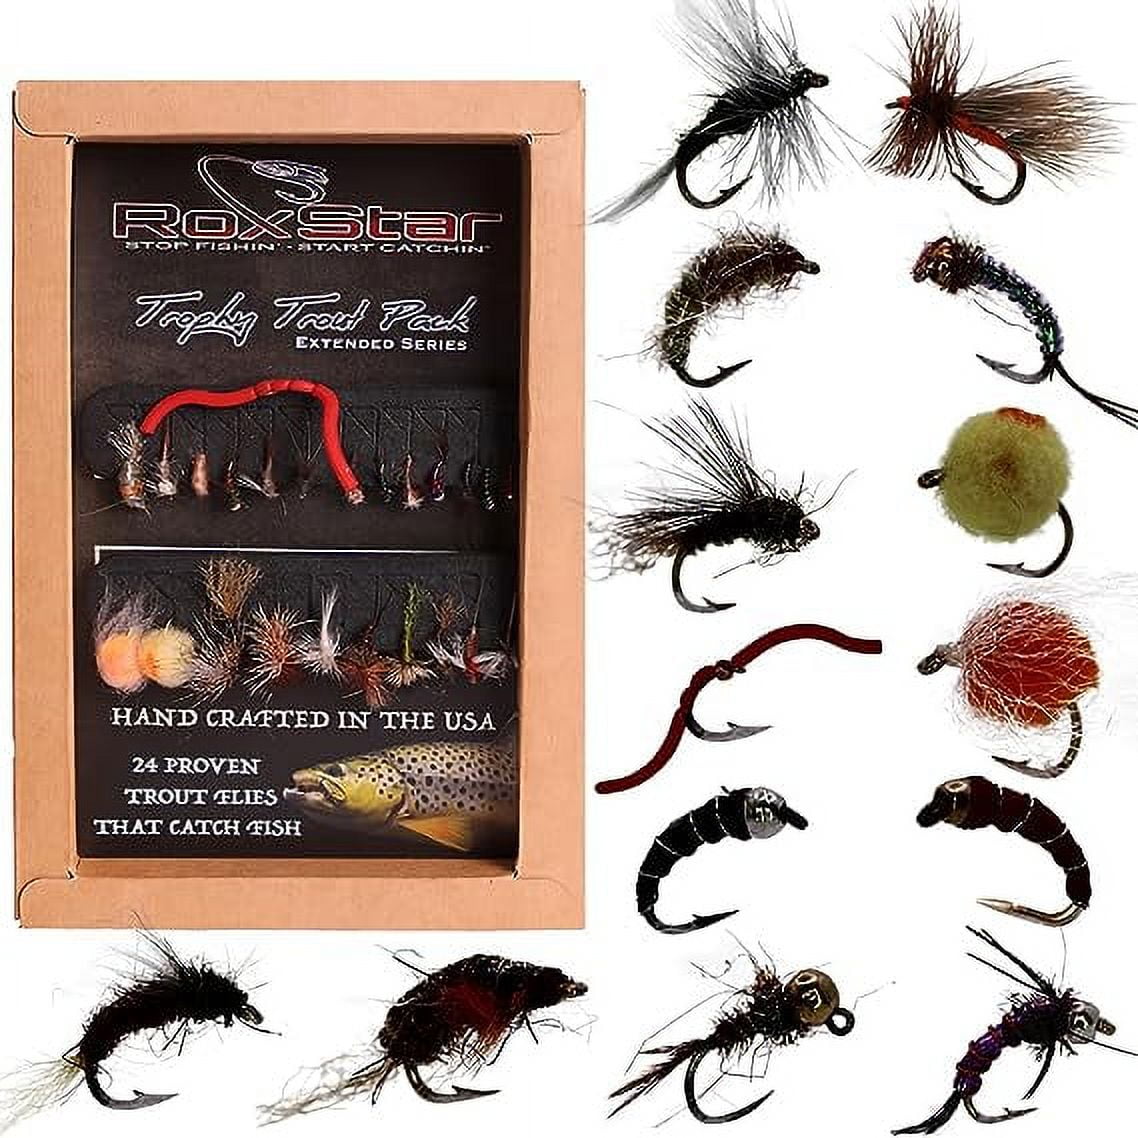 RoxStar Fishing Fly Shop | Stimulator Dry Fly Assortment | 25 Premium  Hand-Tied Trout & Bass Dry Flies | Proudly Made in The USA. (Stimulator  25pk)